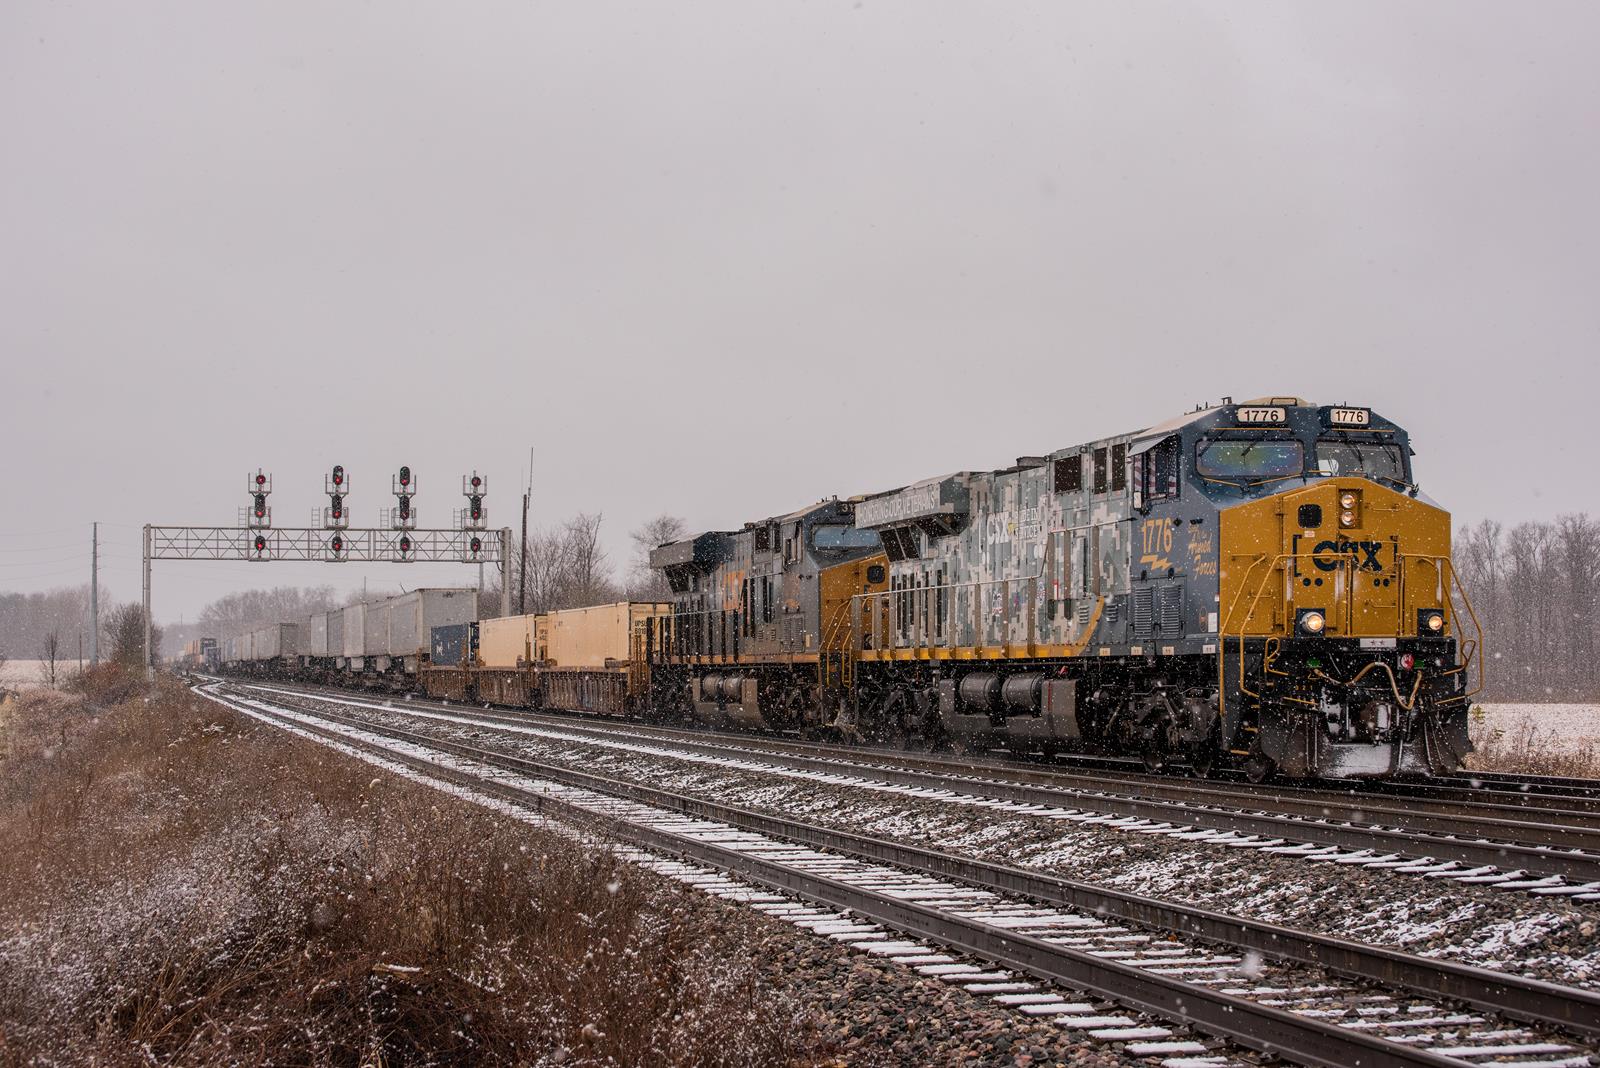 CSXT 1776 is a class GE ES44AC and  is pictured in Altona, Indiana, USA.  This was taken along the Garrett Subdivision on the CSX Transportation. Photo Copyright: Spencer Harman uploaded to Railroad Gallery on 11/13/2022. This photograph of CSXT 1776 was taken on Sunday, November 13, 2022. All Rights Reserved. 